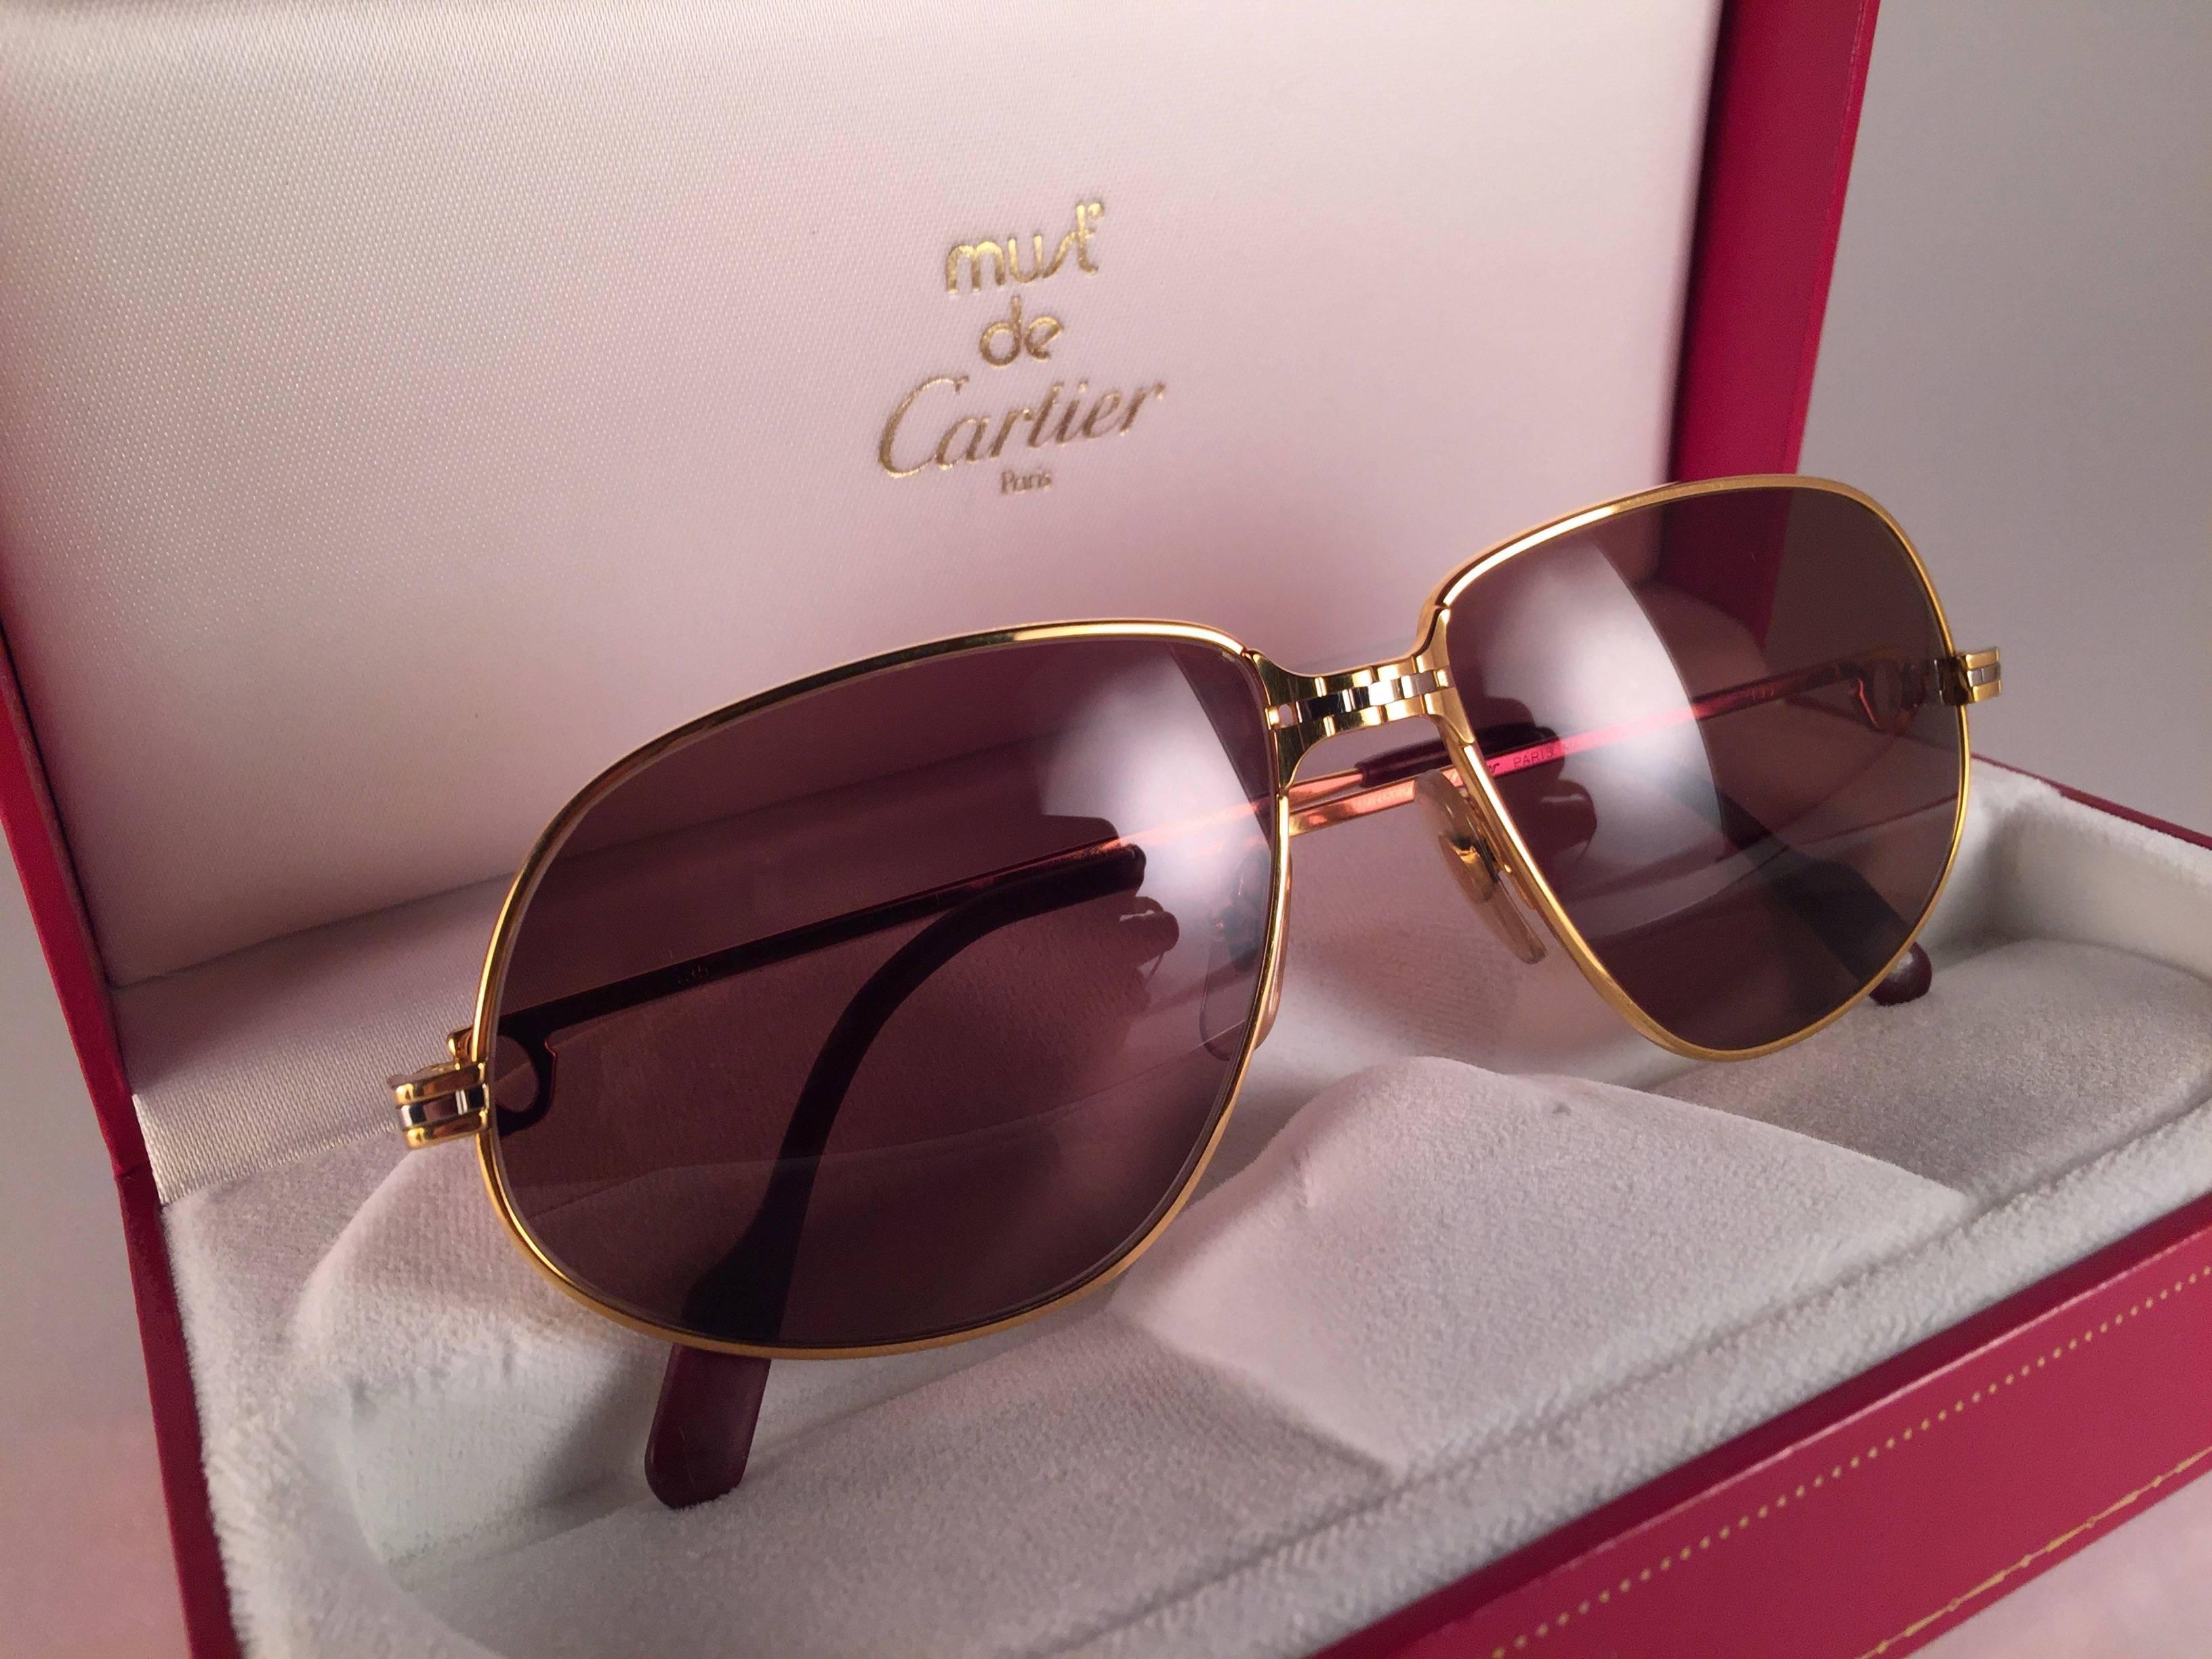 New Vintage Cartier Panthere 56mm Medium Sunglasses France 18k Gold Heavy Plated In Excellent Condition For Sale In Baleares, Baleares